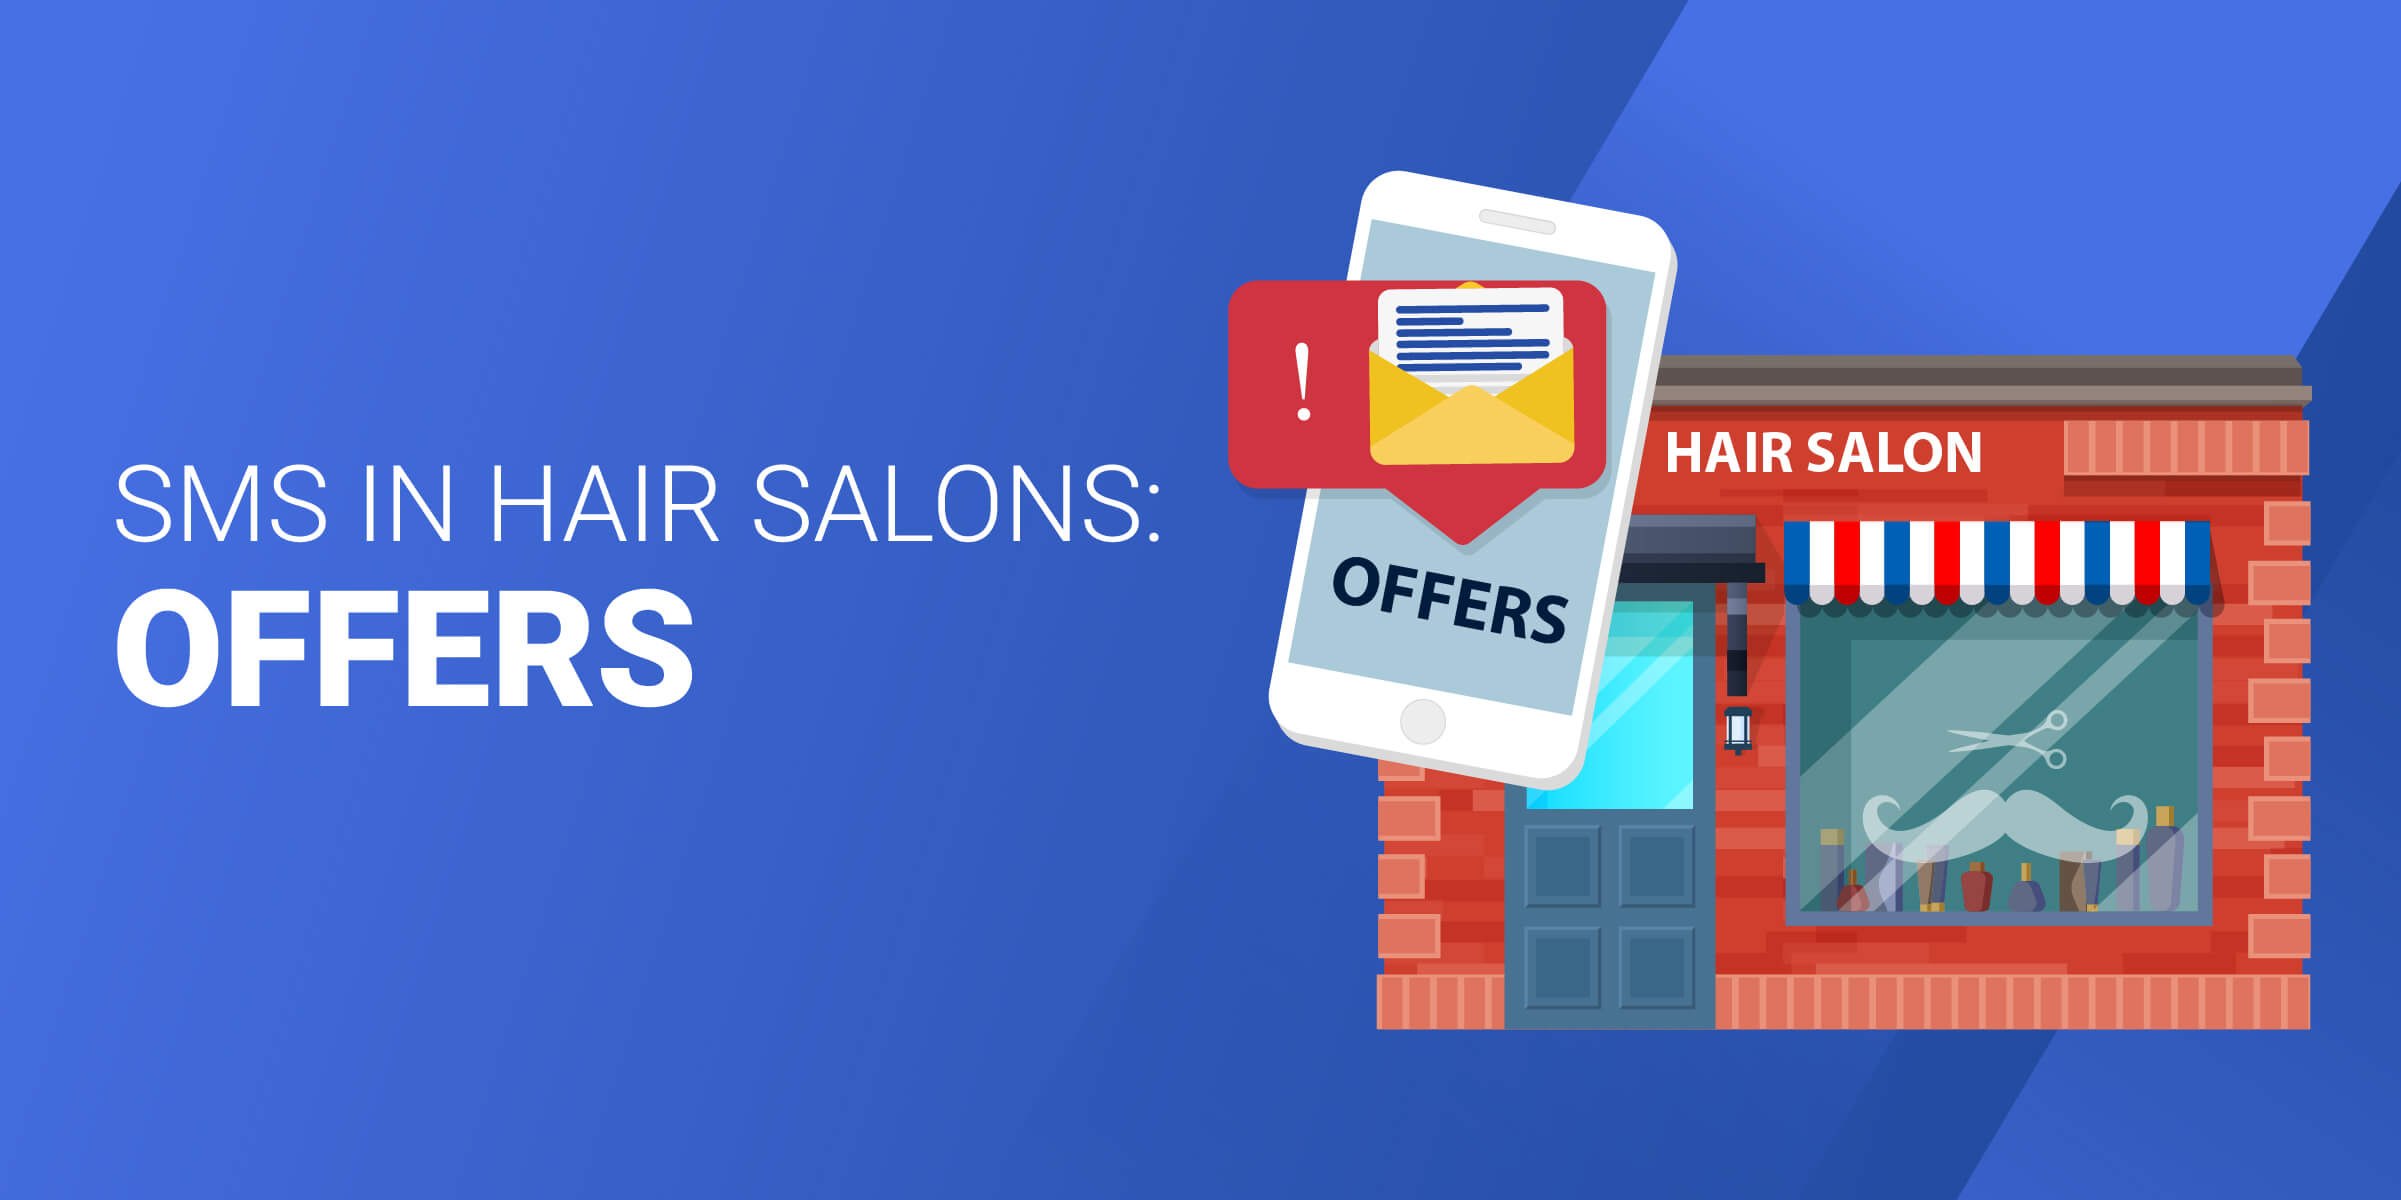 SMS in Hair Salons Offers